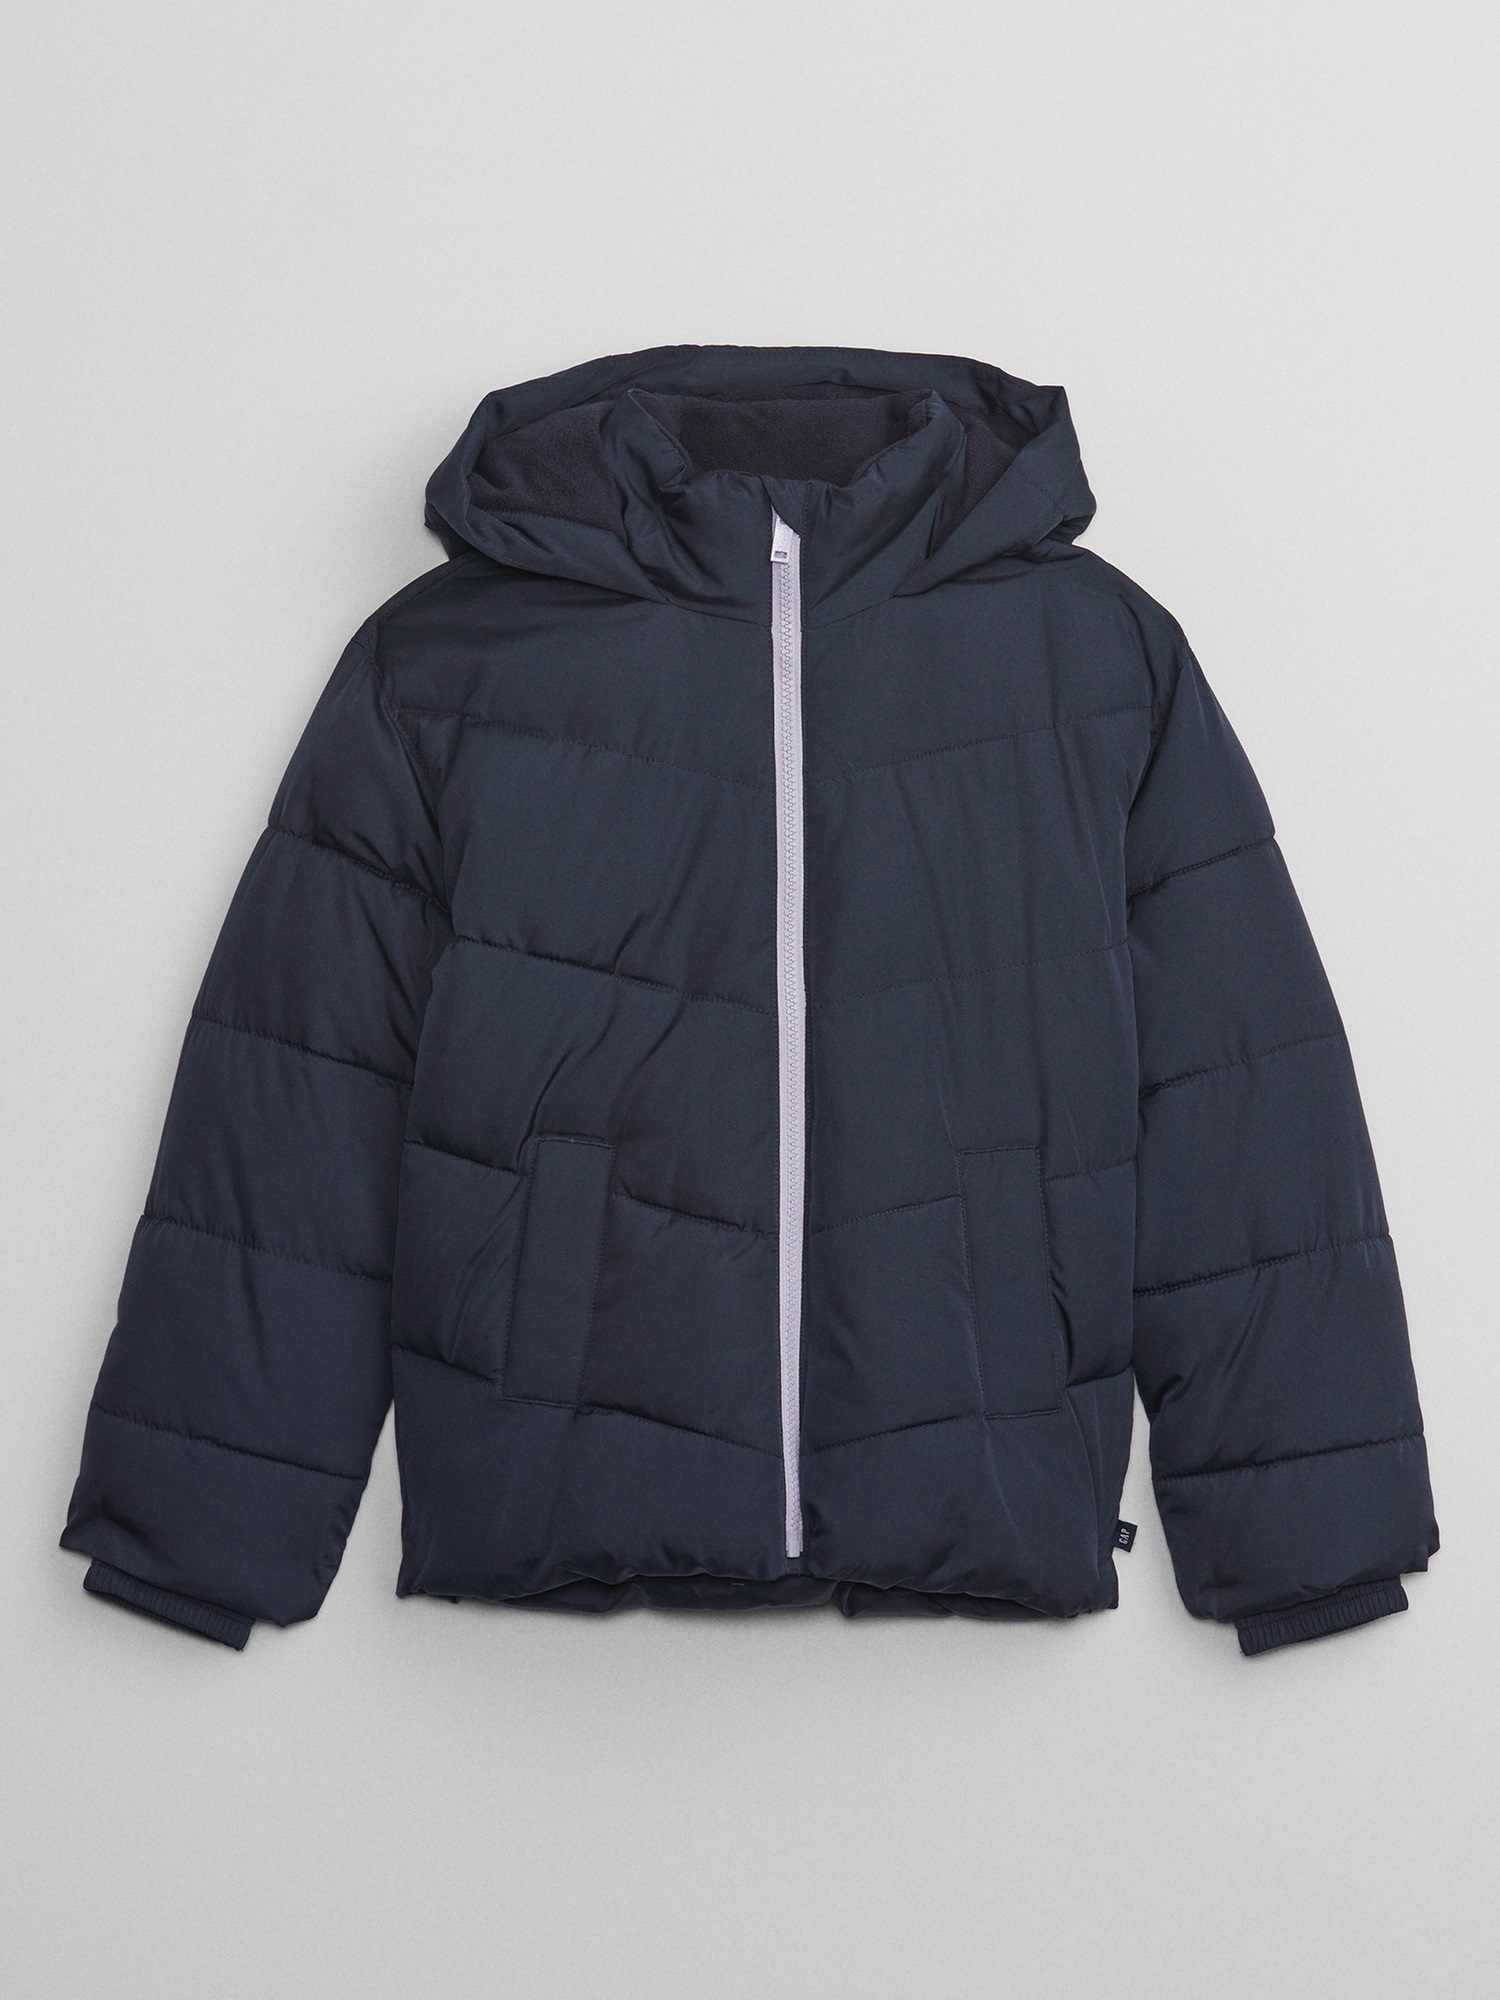 GAP Kids Quilted Jacket Hooded - Girls